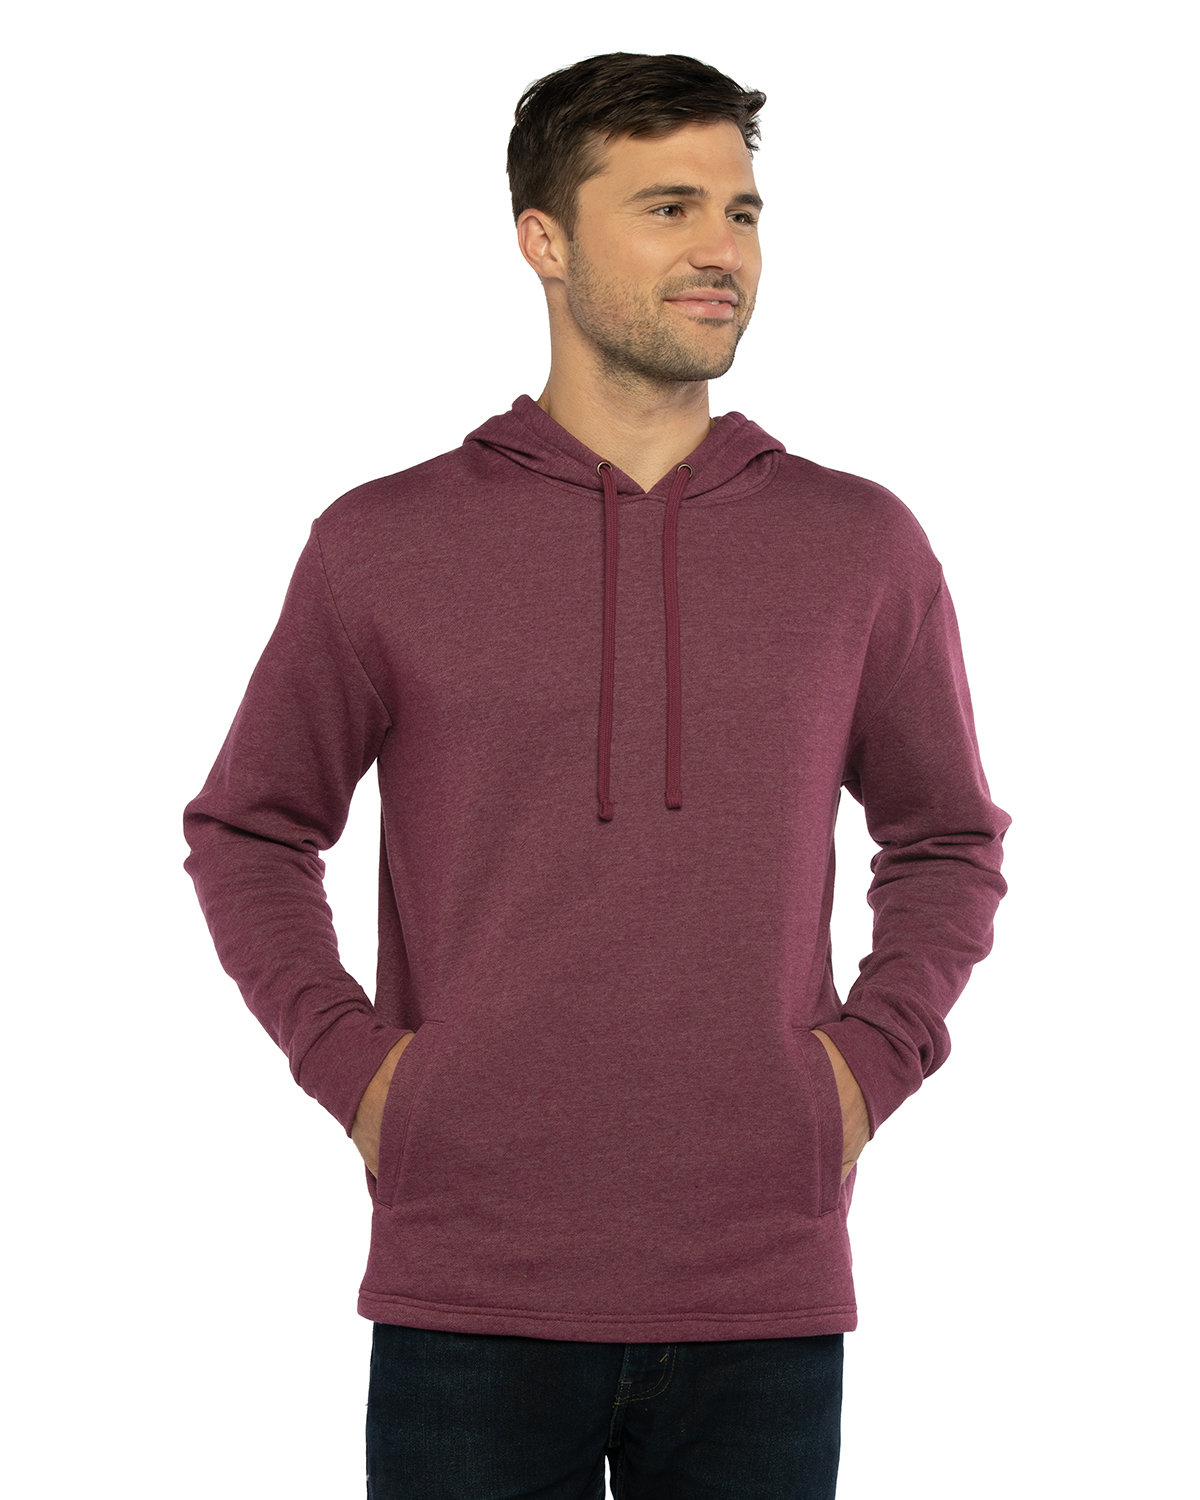 Next Level Apparel Adult PCH Pullover Hoodie heather maroon 